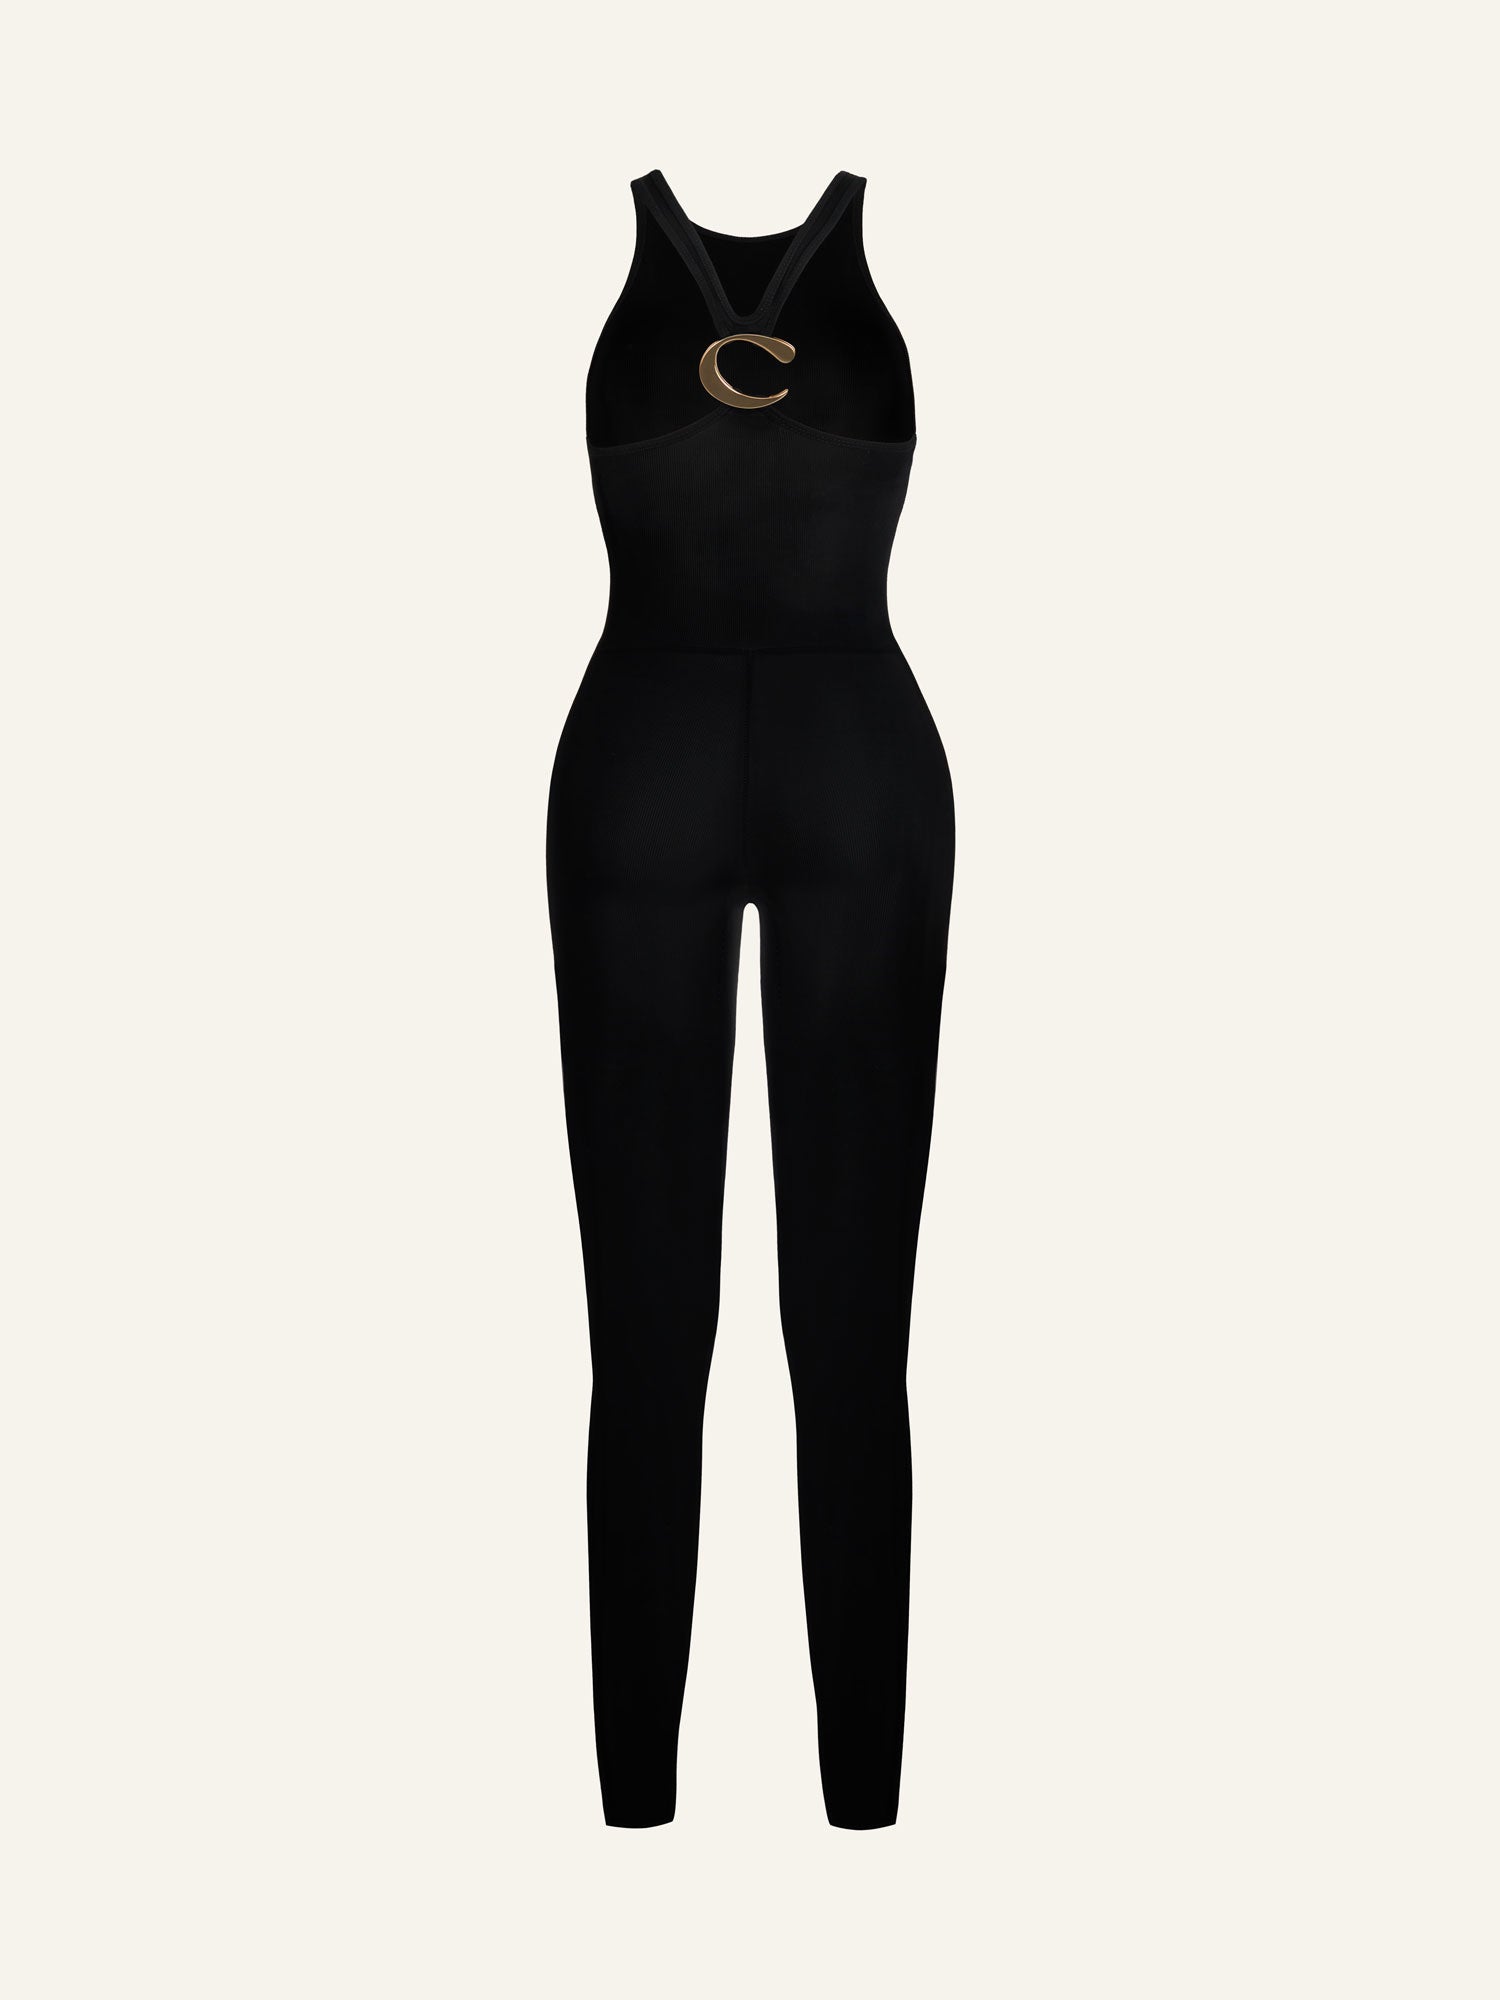 Product photo from the back of a black viscose jumpsuit